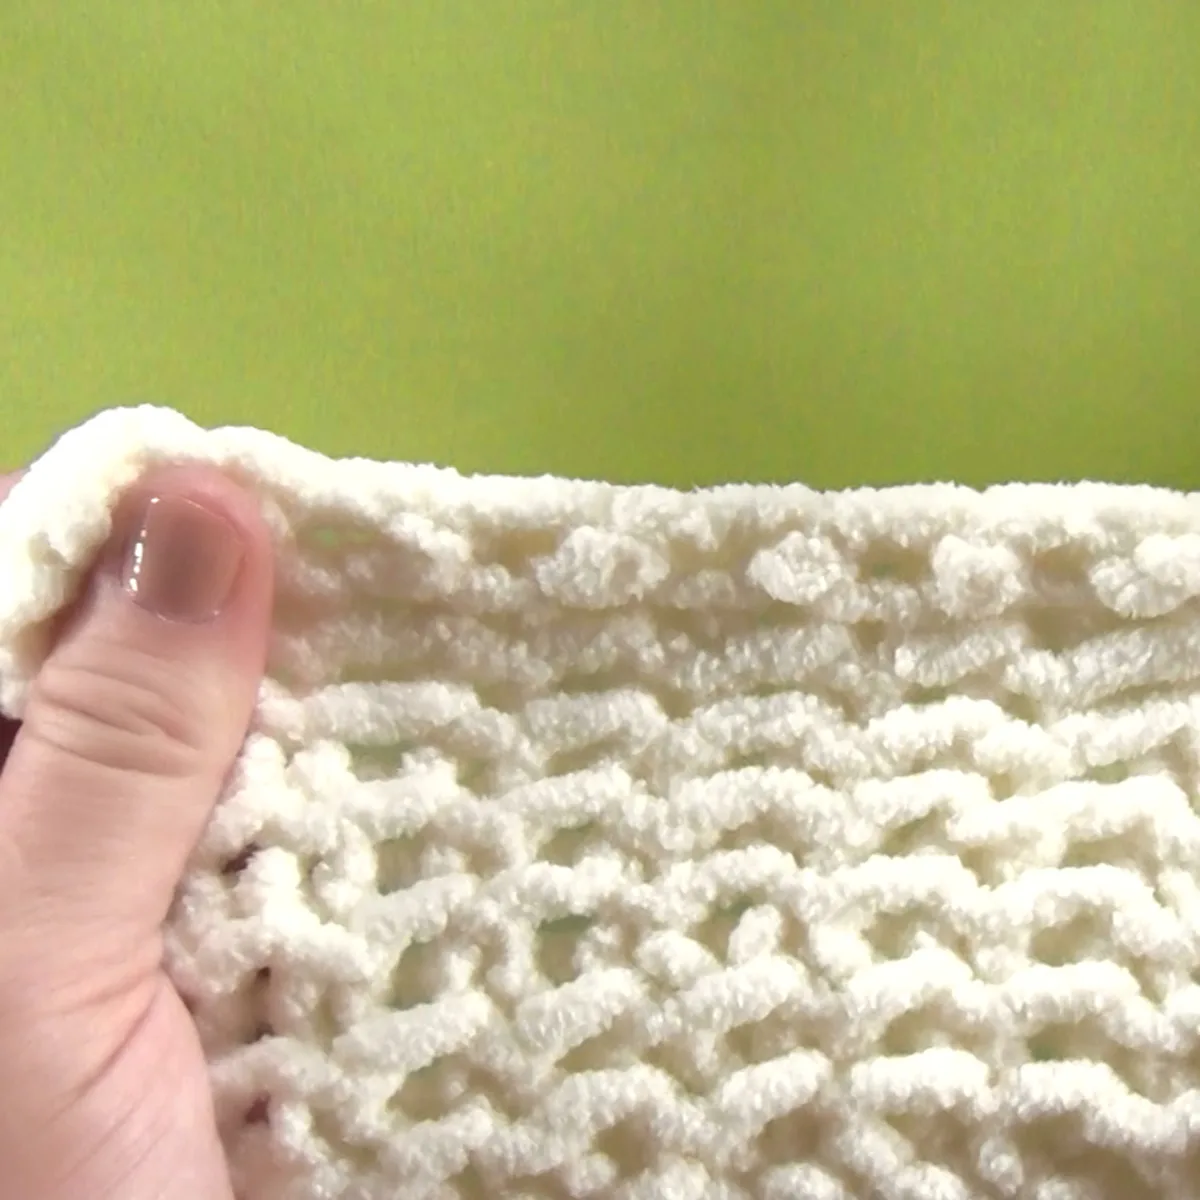 How to: Tighten the Last Stitch of Your Bind Off Edge